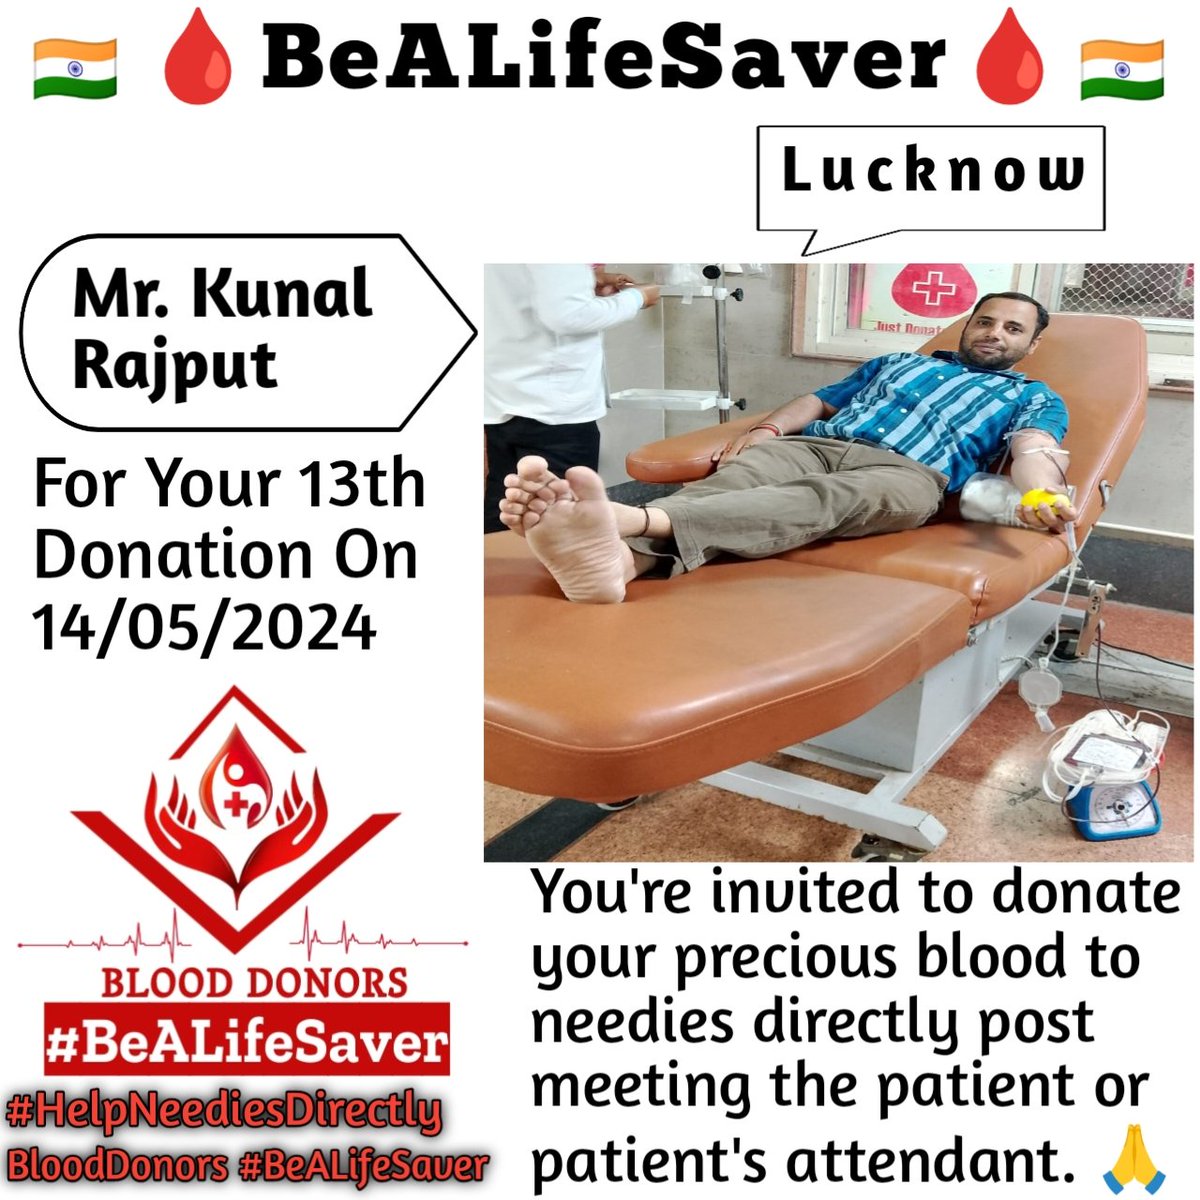 Lucknow BeALifeSaver
Kudos_Mr_Kunal_Rajput_Ji
#HelpNeediesDirectly

Today's hero
Mr. Kunal_Rajput Ji donated blood in Lucknow for the 13th Time for one of the needies. Heartfelt Gratitude and Respect to Kunal Rajput Ji for his blood donation for Patient admitted in Lucknow.